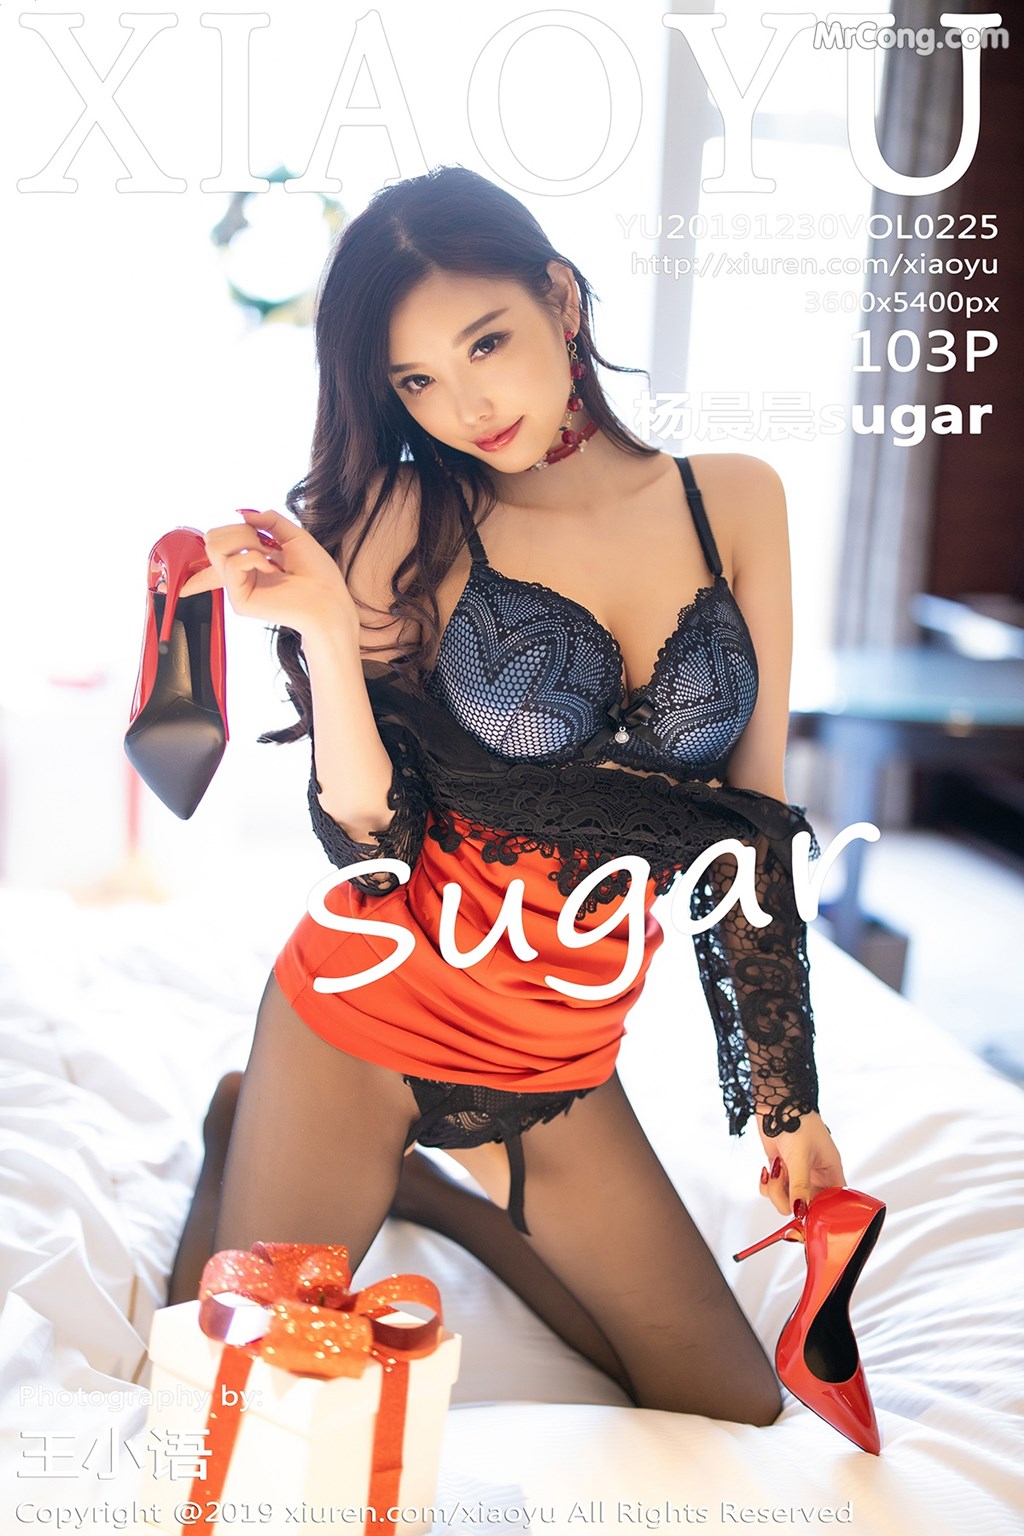 XiaoYu Vol. 225: Yang Chen Chen (杨晨晨 sugar) (104 pictures)